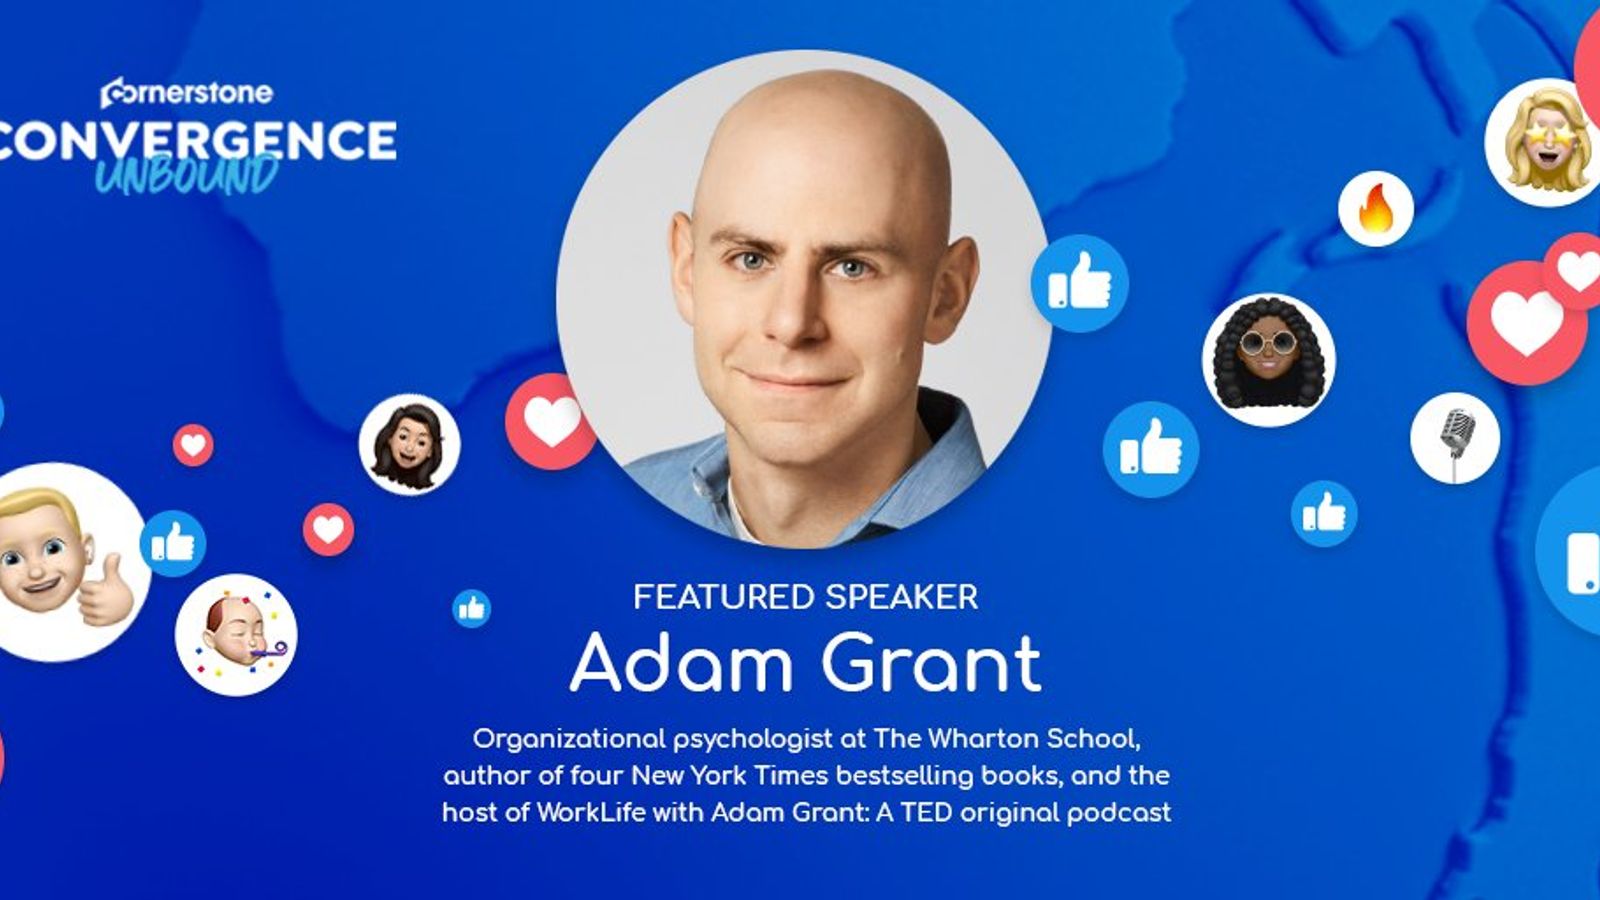 Adam Grant at Convergence: Do You Empower Your Organizational "Givers"?